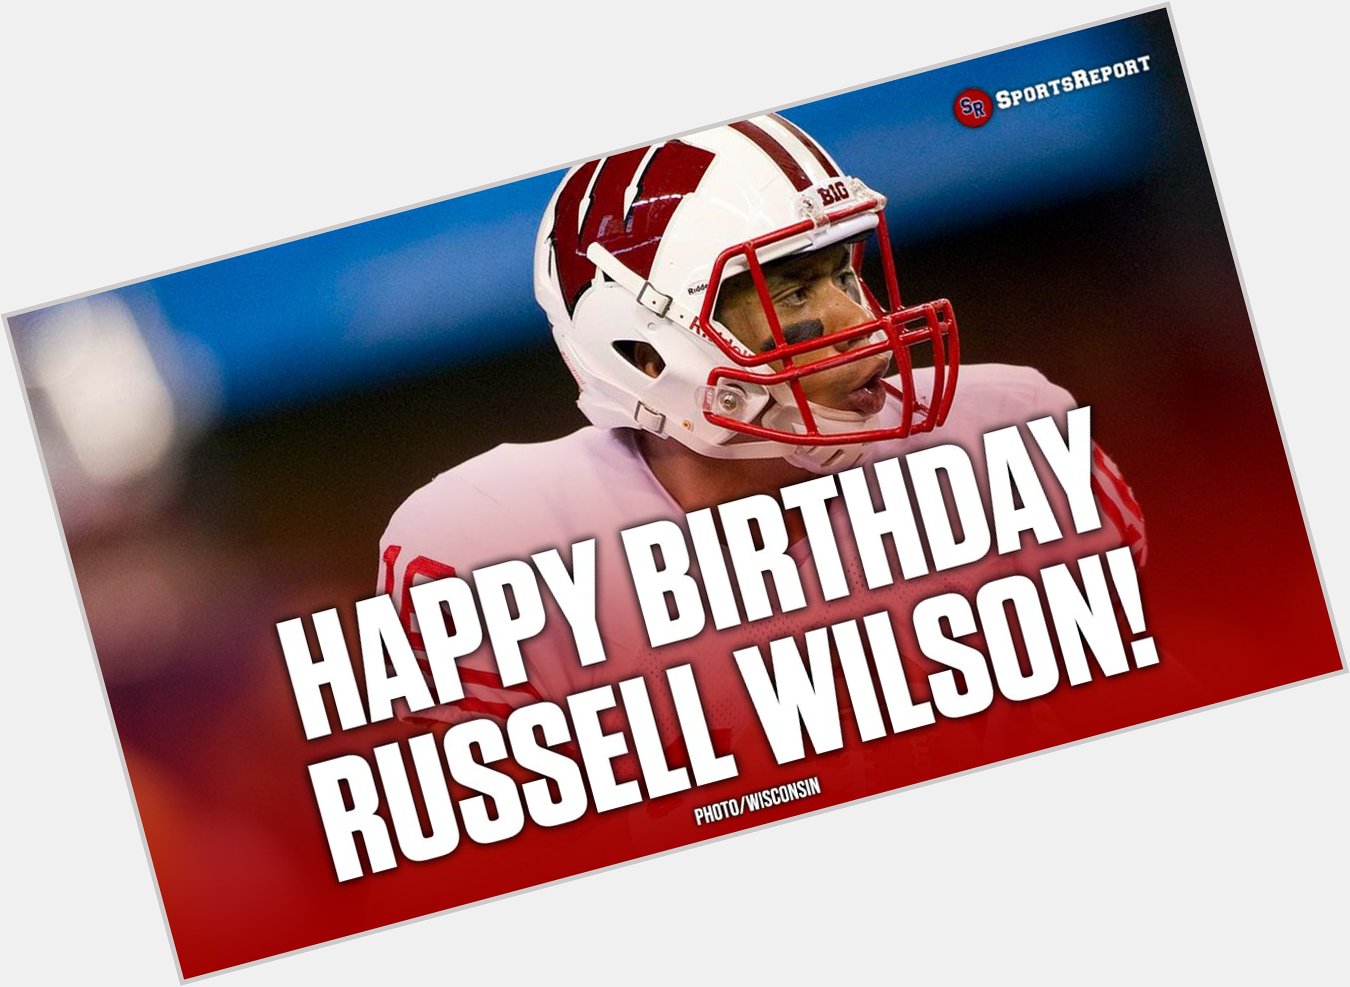  Fans, let\s wish Russell Wilson a Happy Birthday! GO 